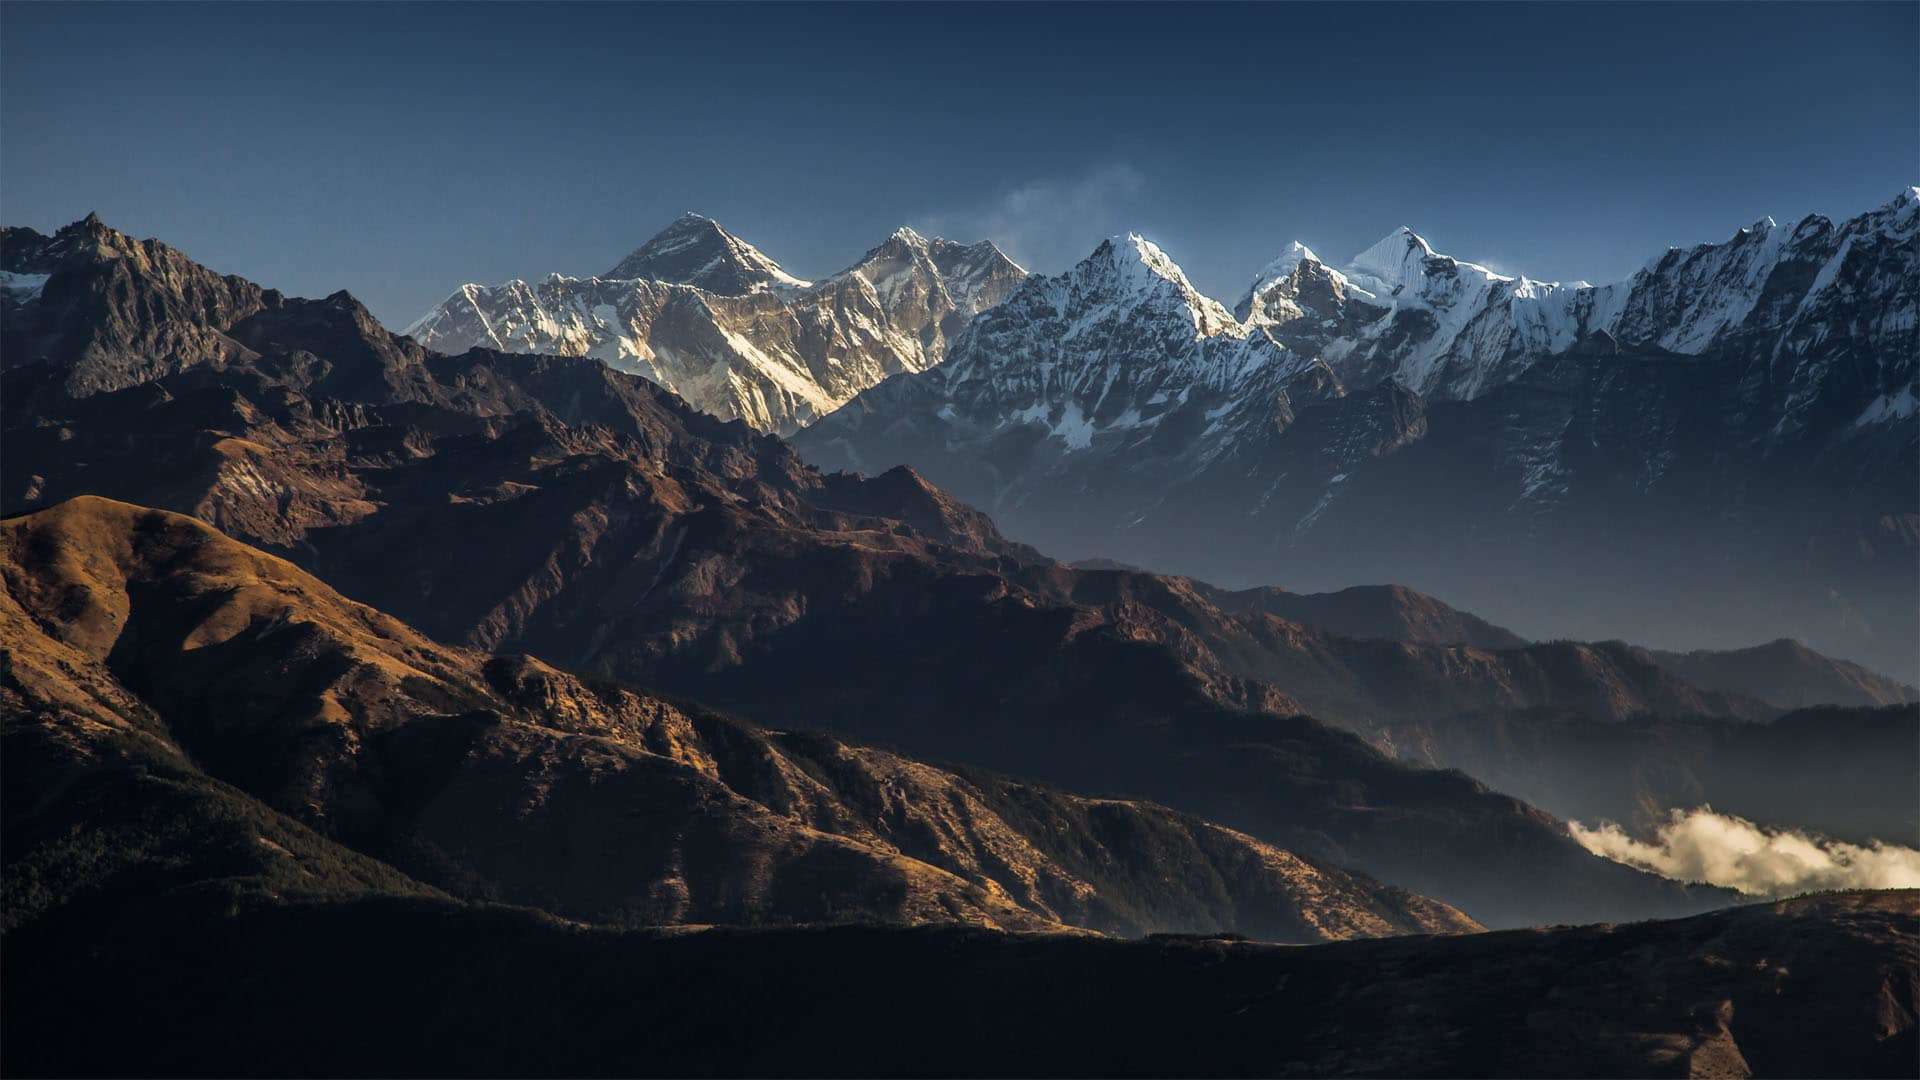 Magic in the mighty Himalayas